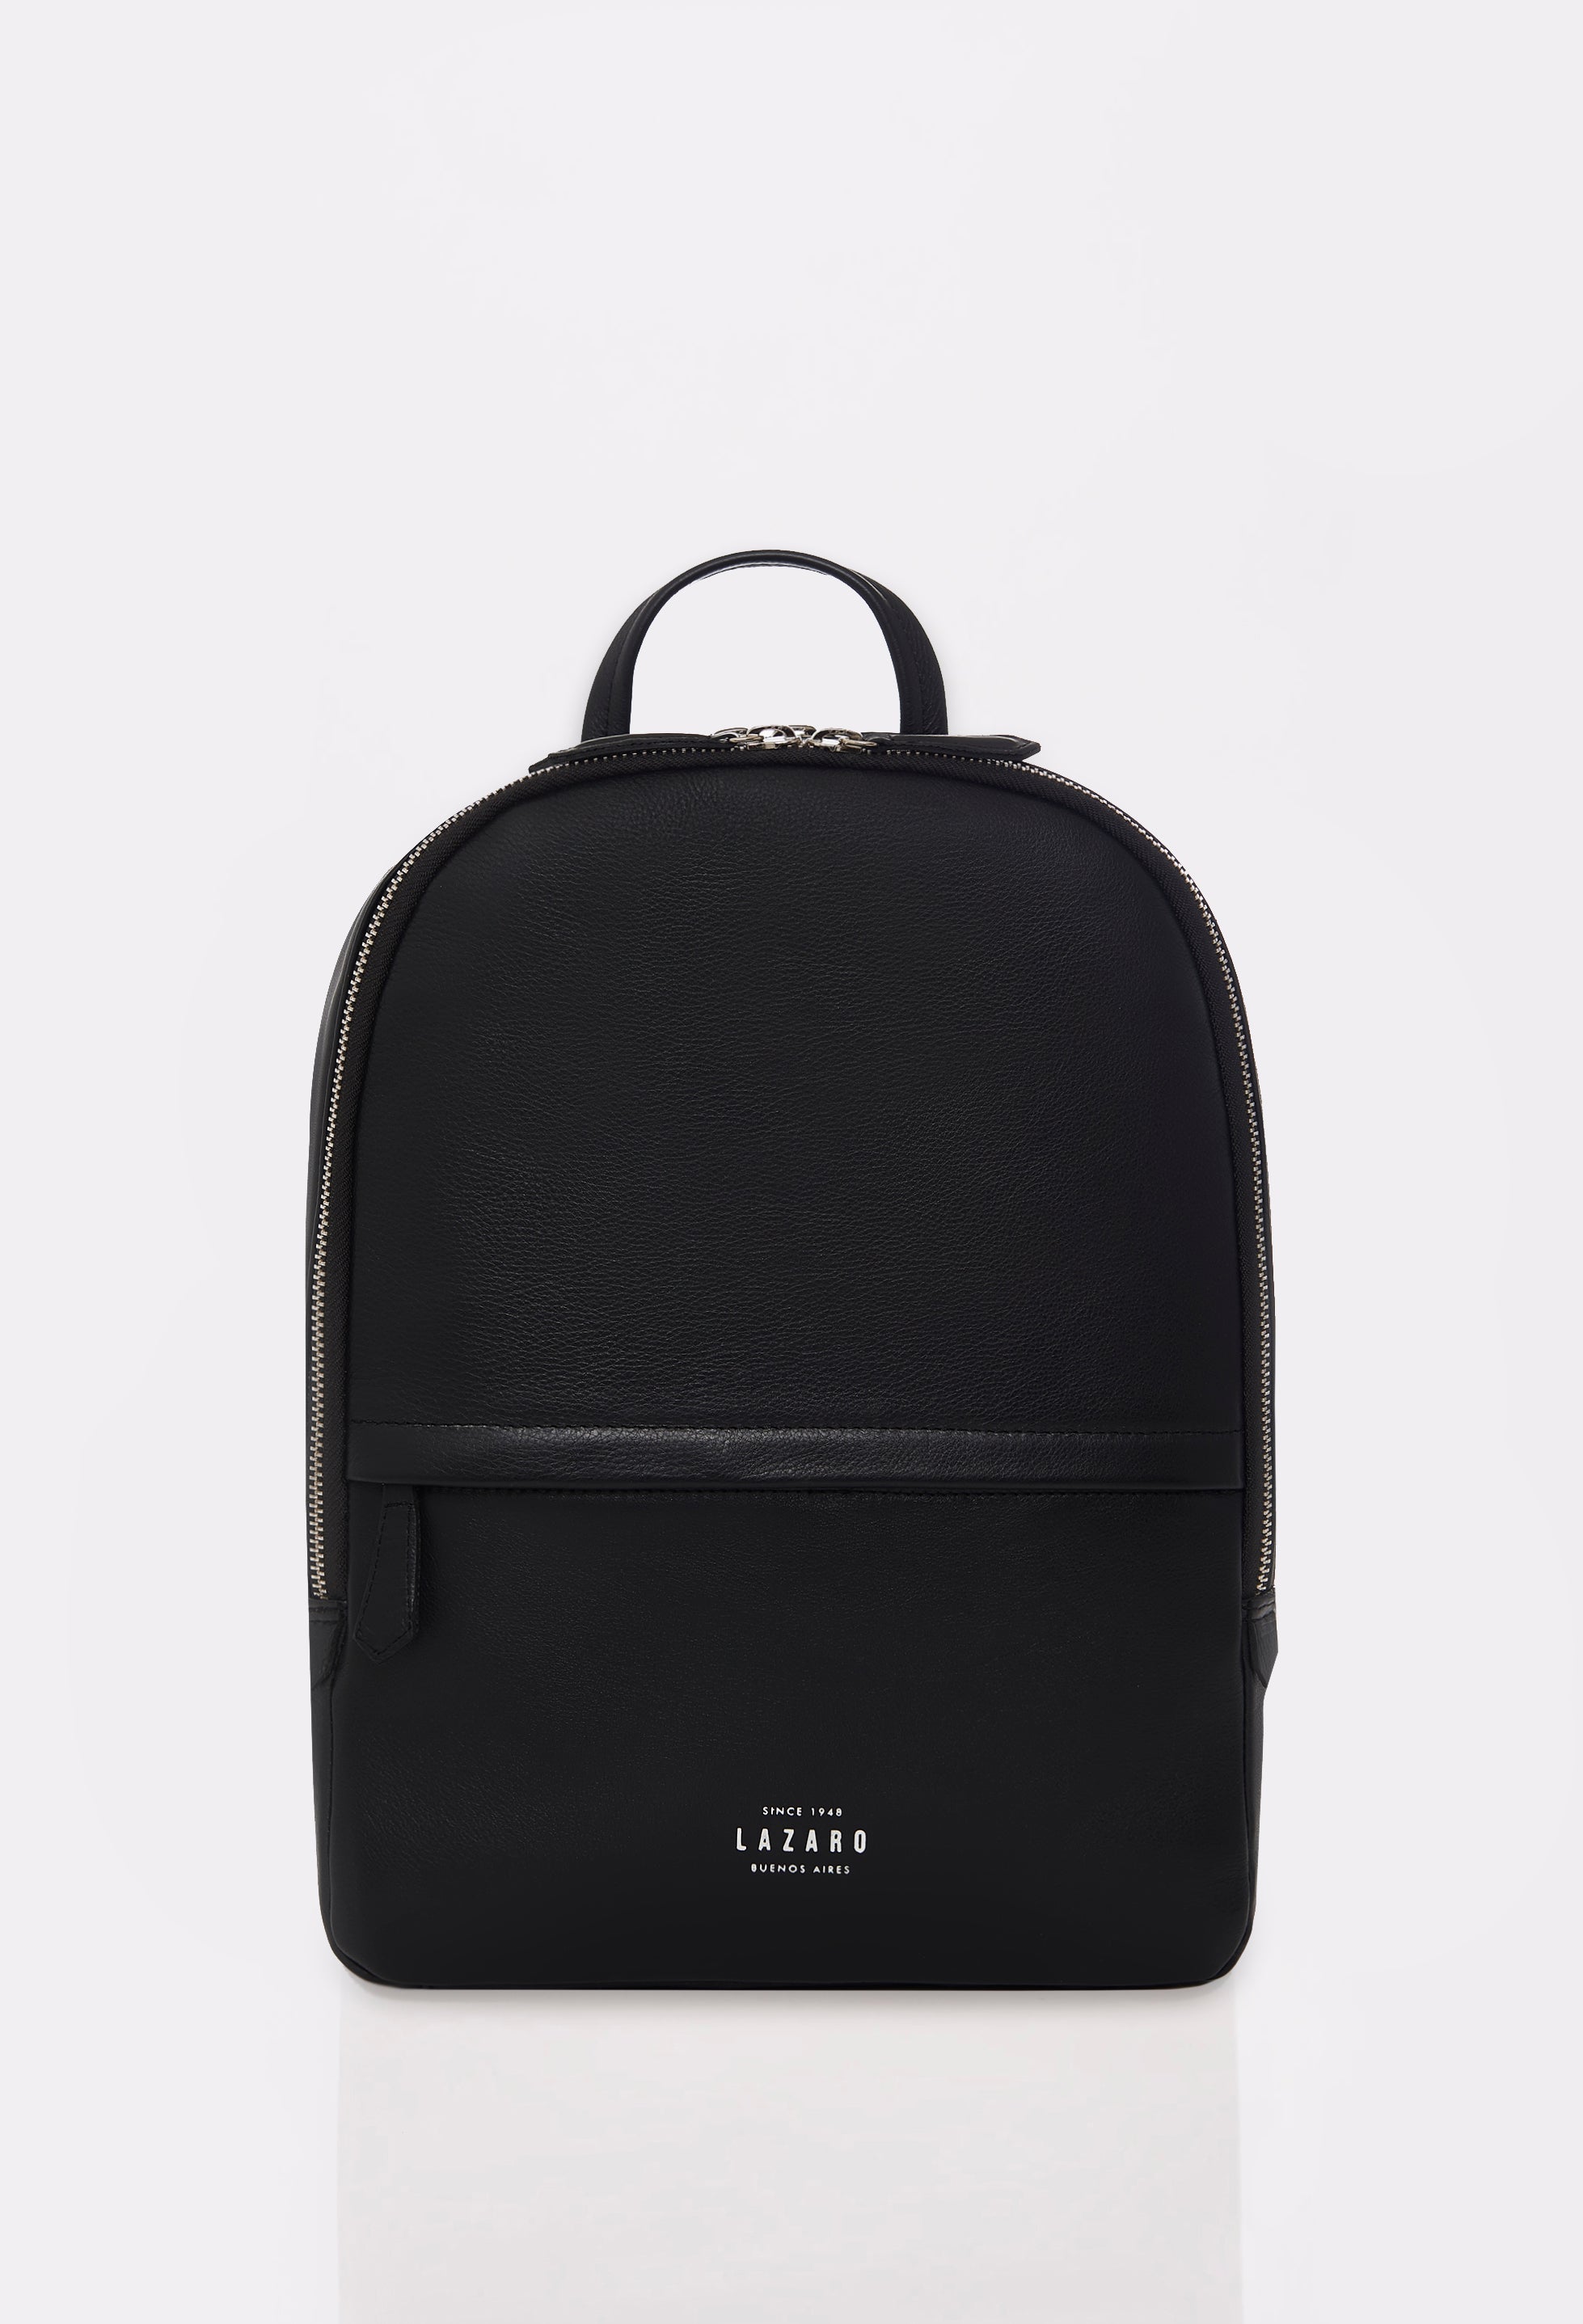 Front of a Black Leather Backpack made out of Argentinian Bridge Leather with 2 main compartments and 2 external zippered pockets.